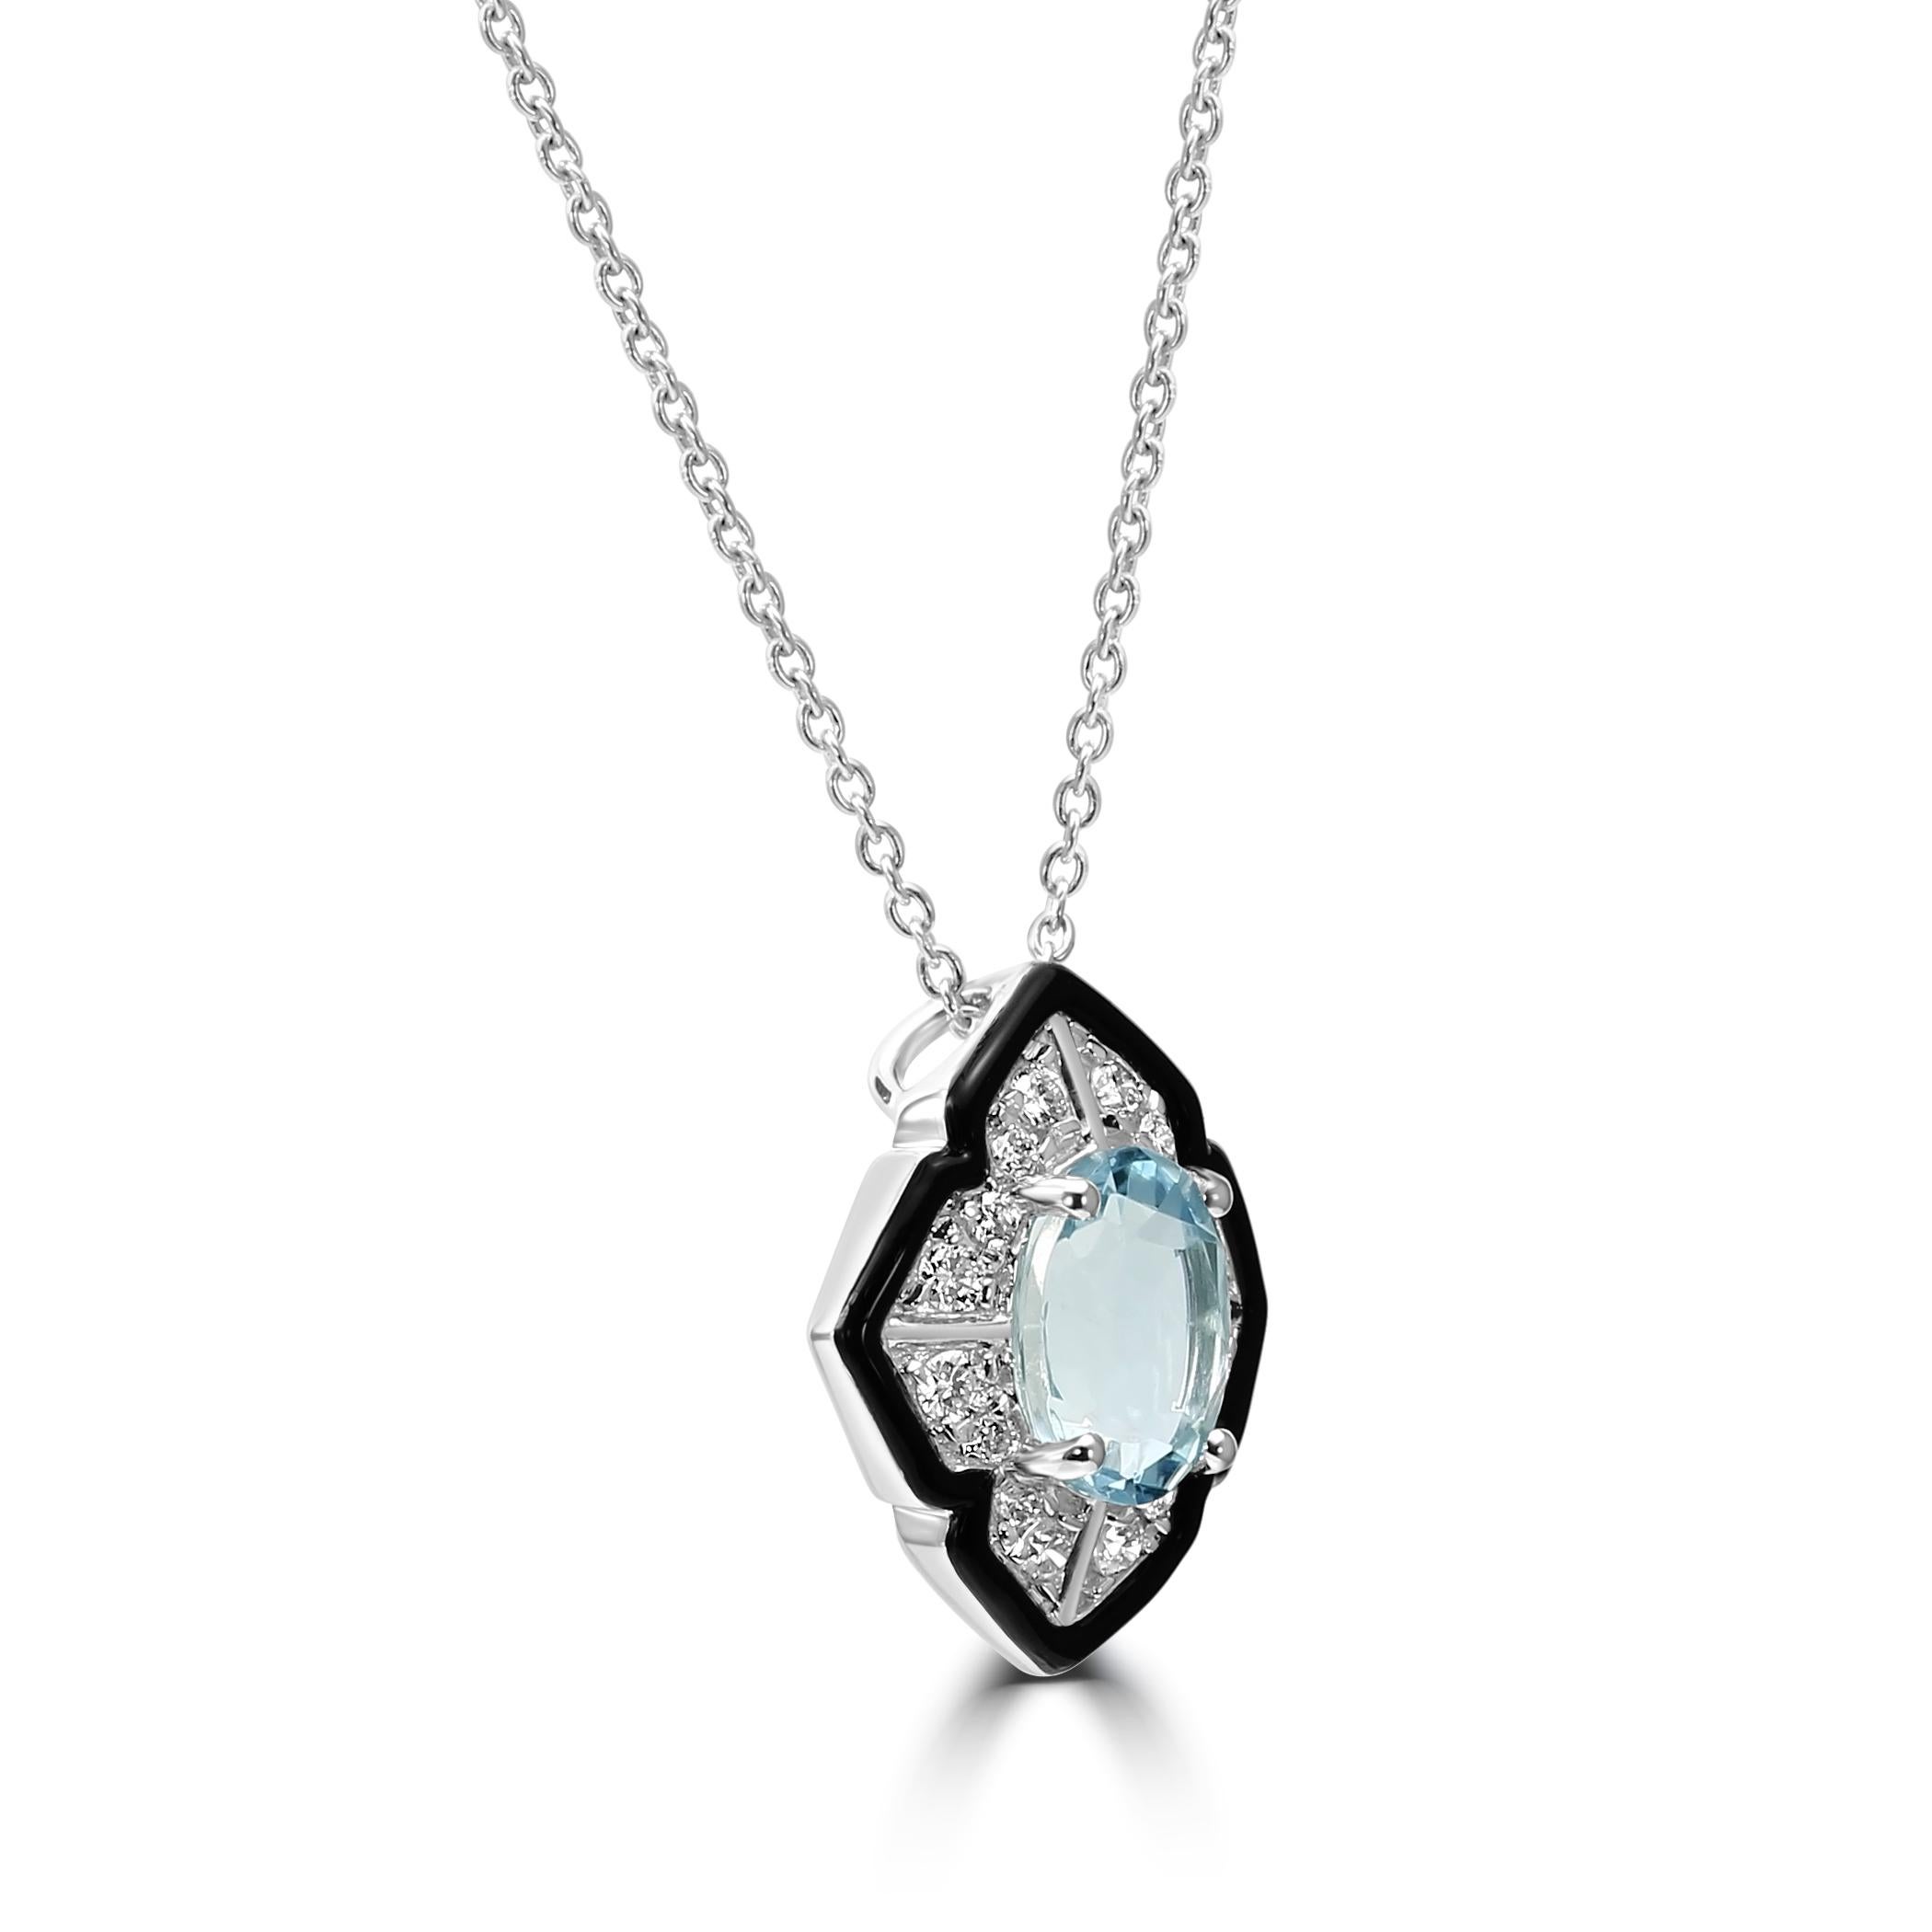 Step into the glamour of the Art Deco era with our 14K White Gold Pendant Fashion Necklace.

This exquisite piece is a celebration of vintage-inspired elegance, featuring a focal point of a captivating Aquamarine Oval, weighing 1.78 carats. The soft